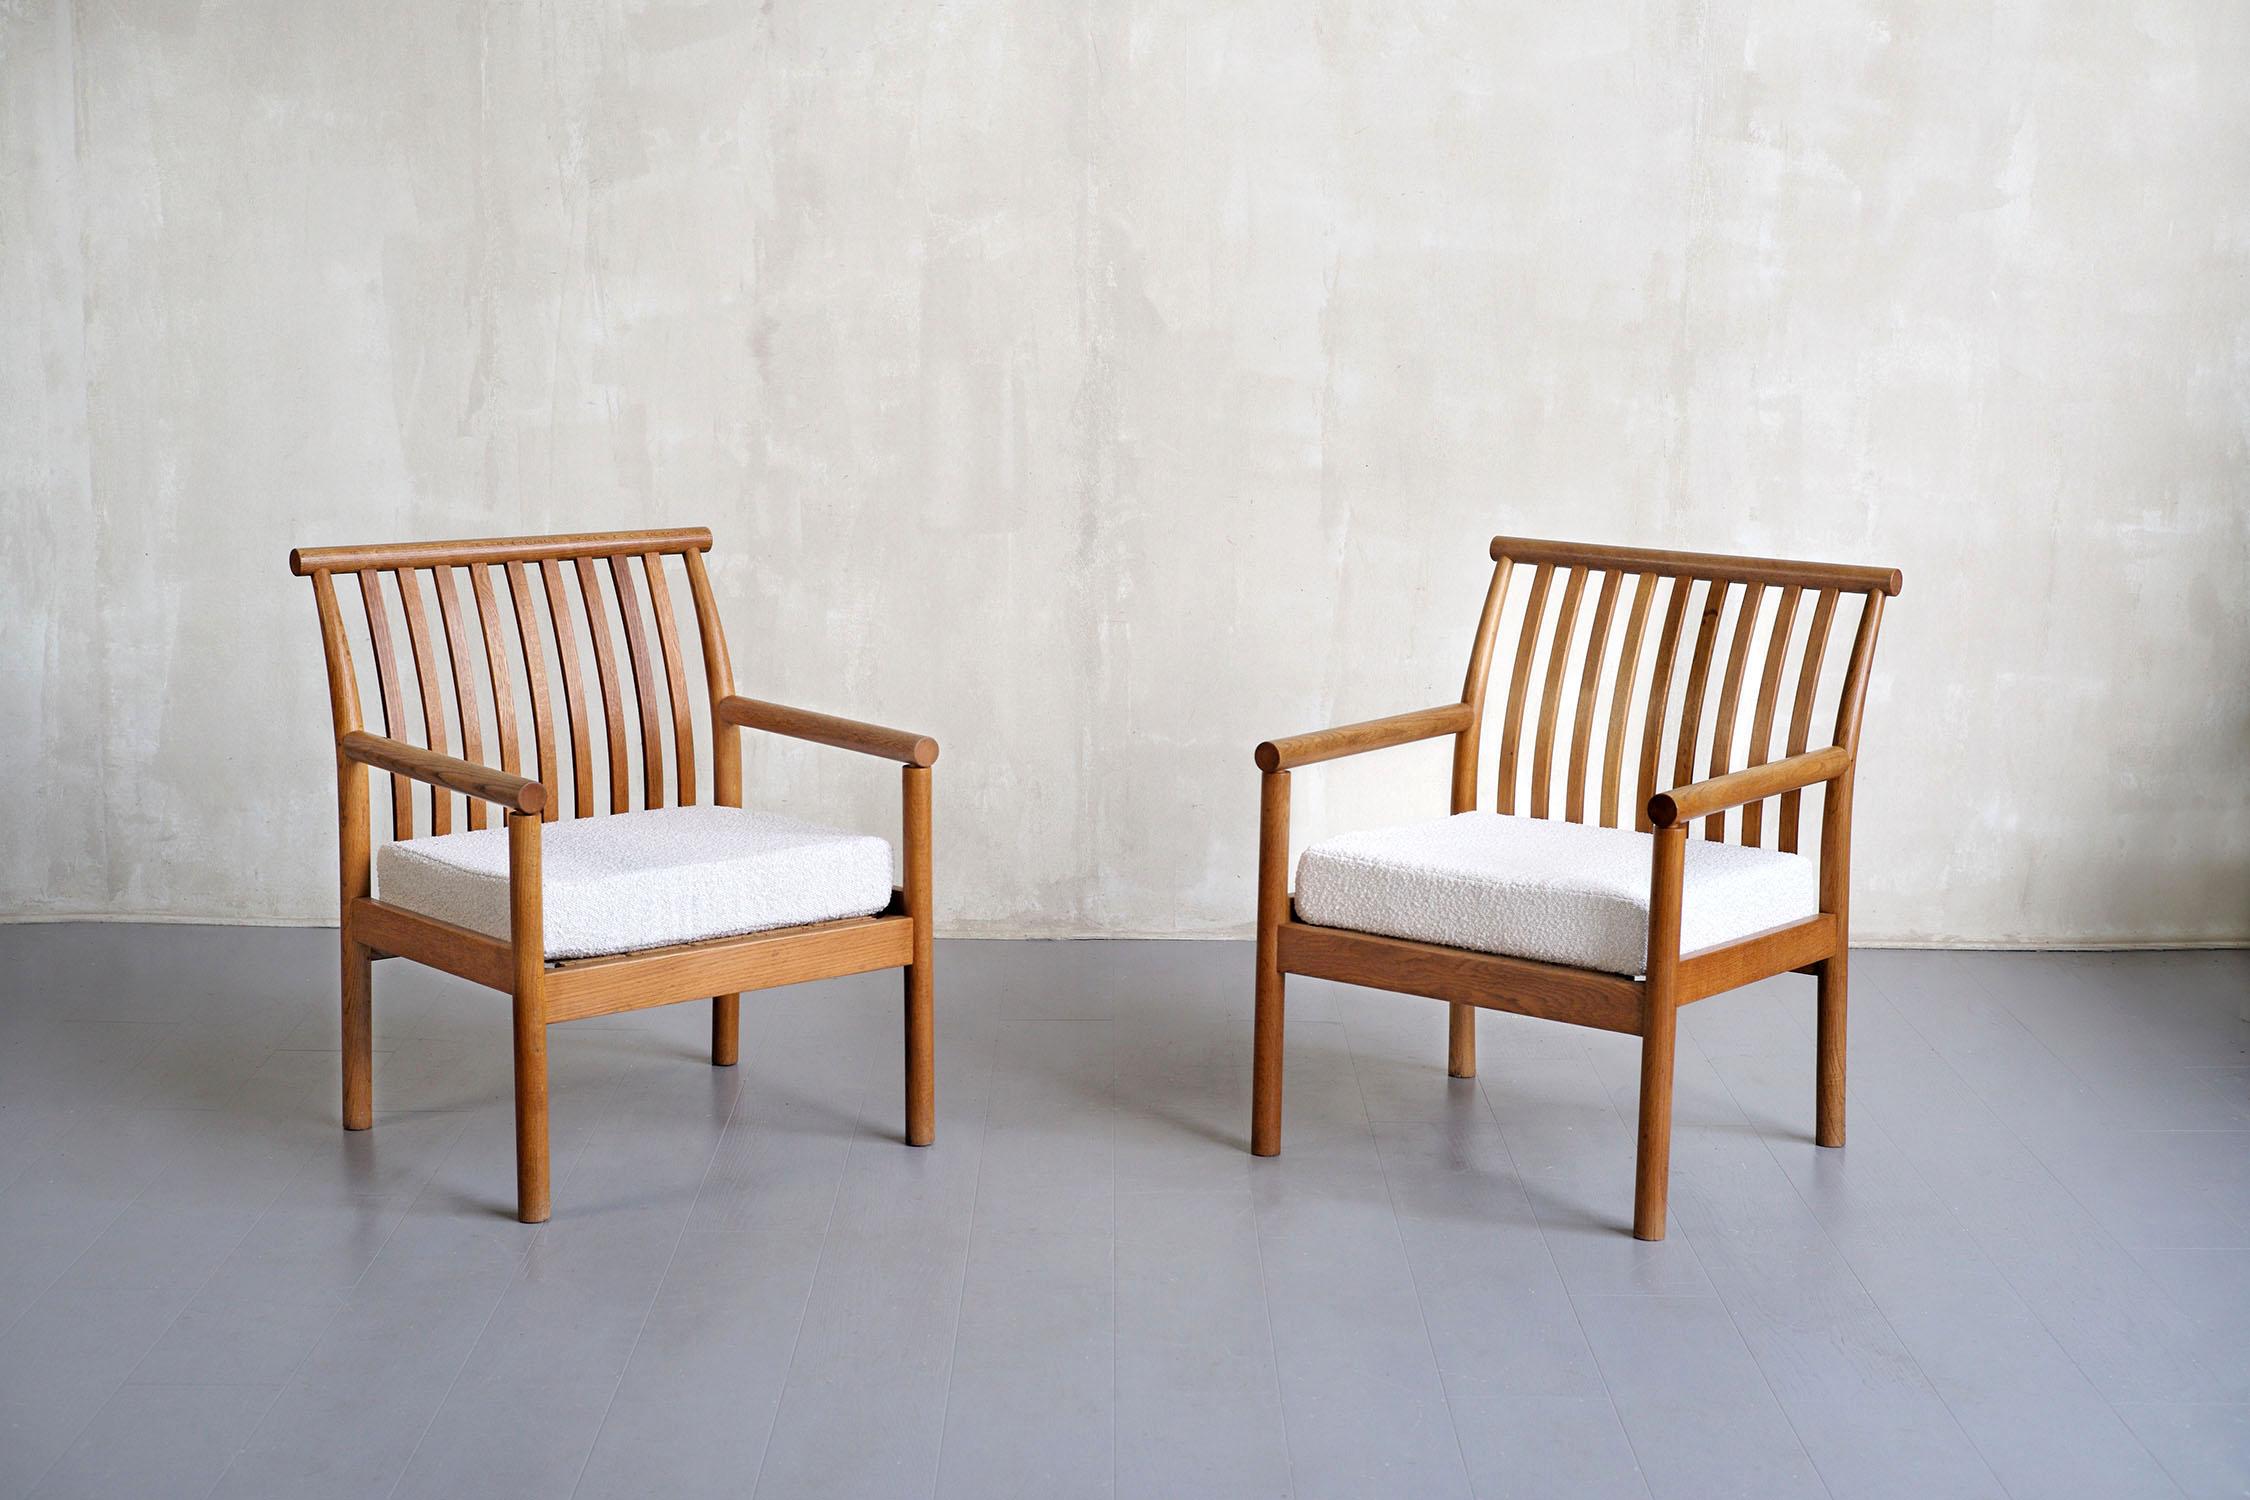 Isamu Kenmochi (1912-1971), pair of armchairs by Akita Mokko, Yuzawa, Japan 1964.
Pair of Japanese modernism, influenced by Bruno Taut, Charlotte Perriand and Isamu Noguchi, it claims a design bringing together 